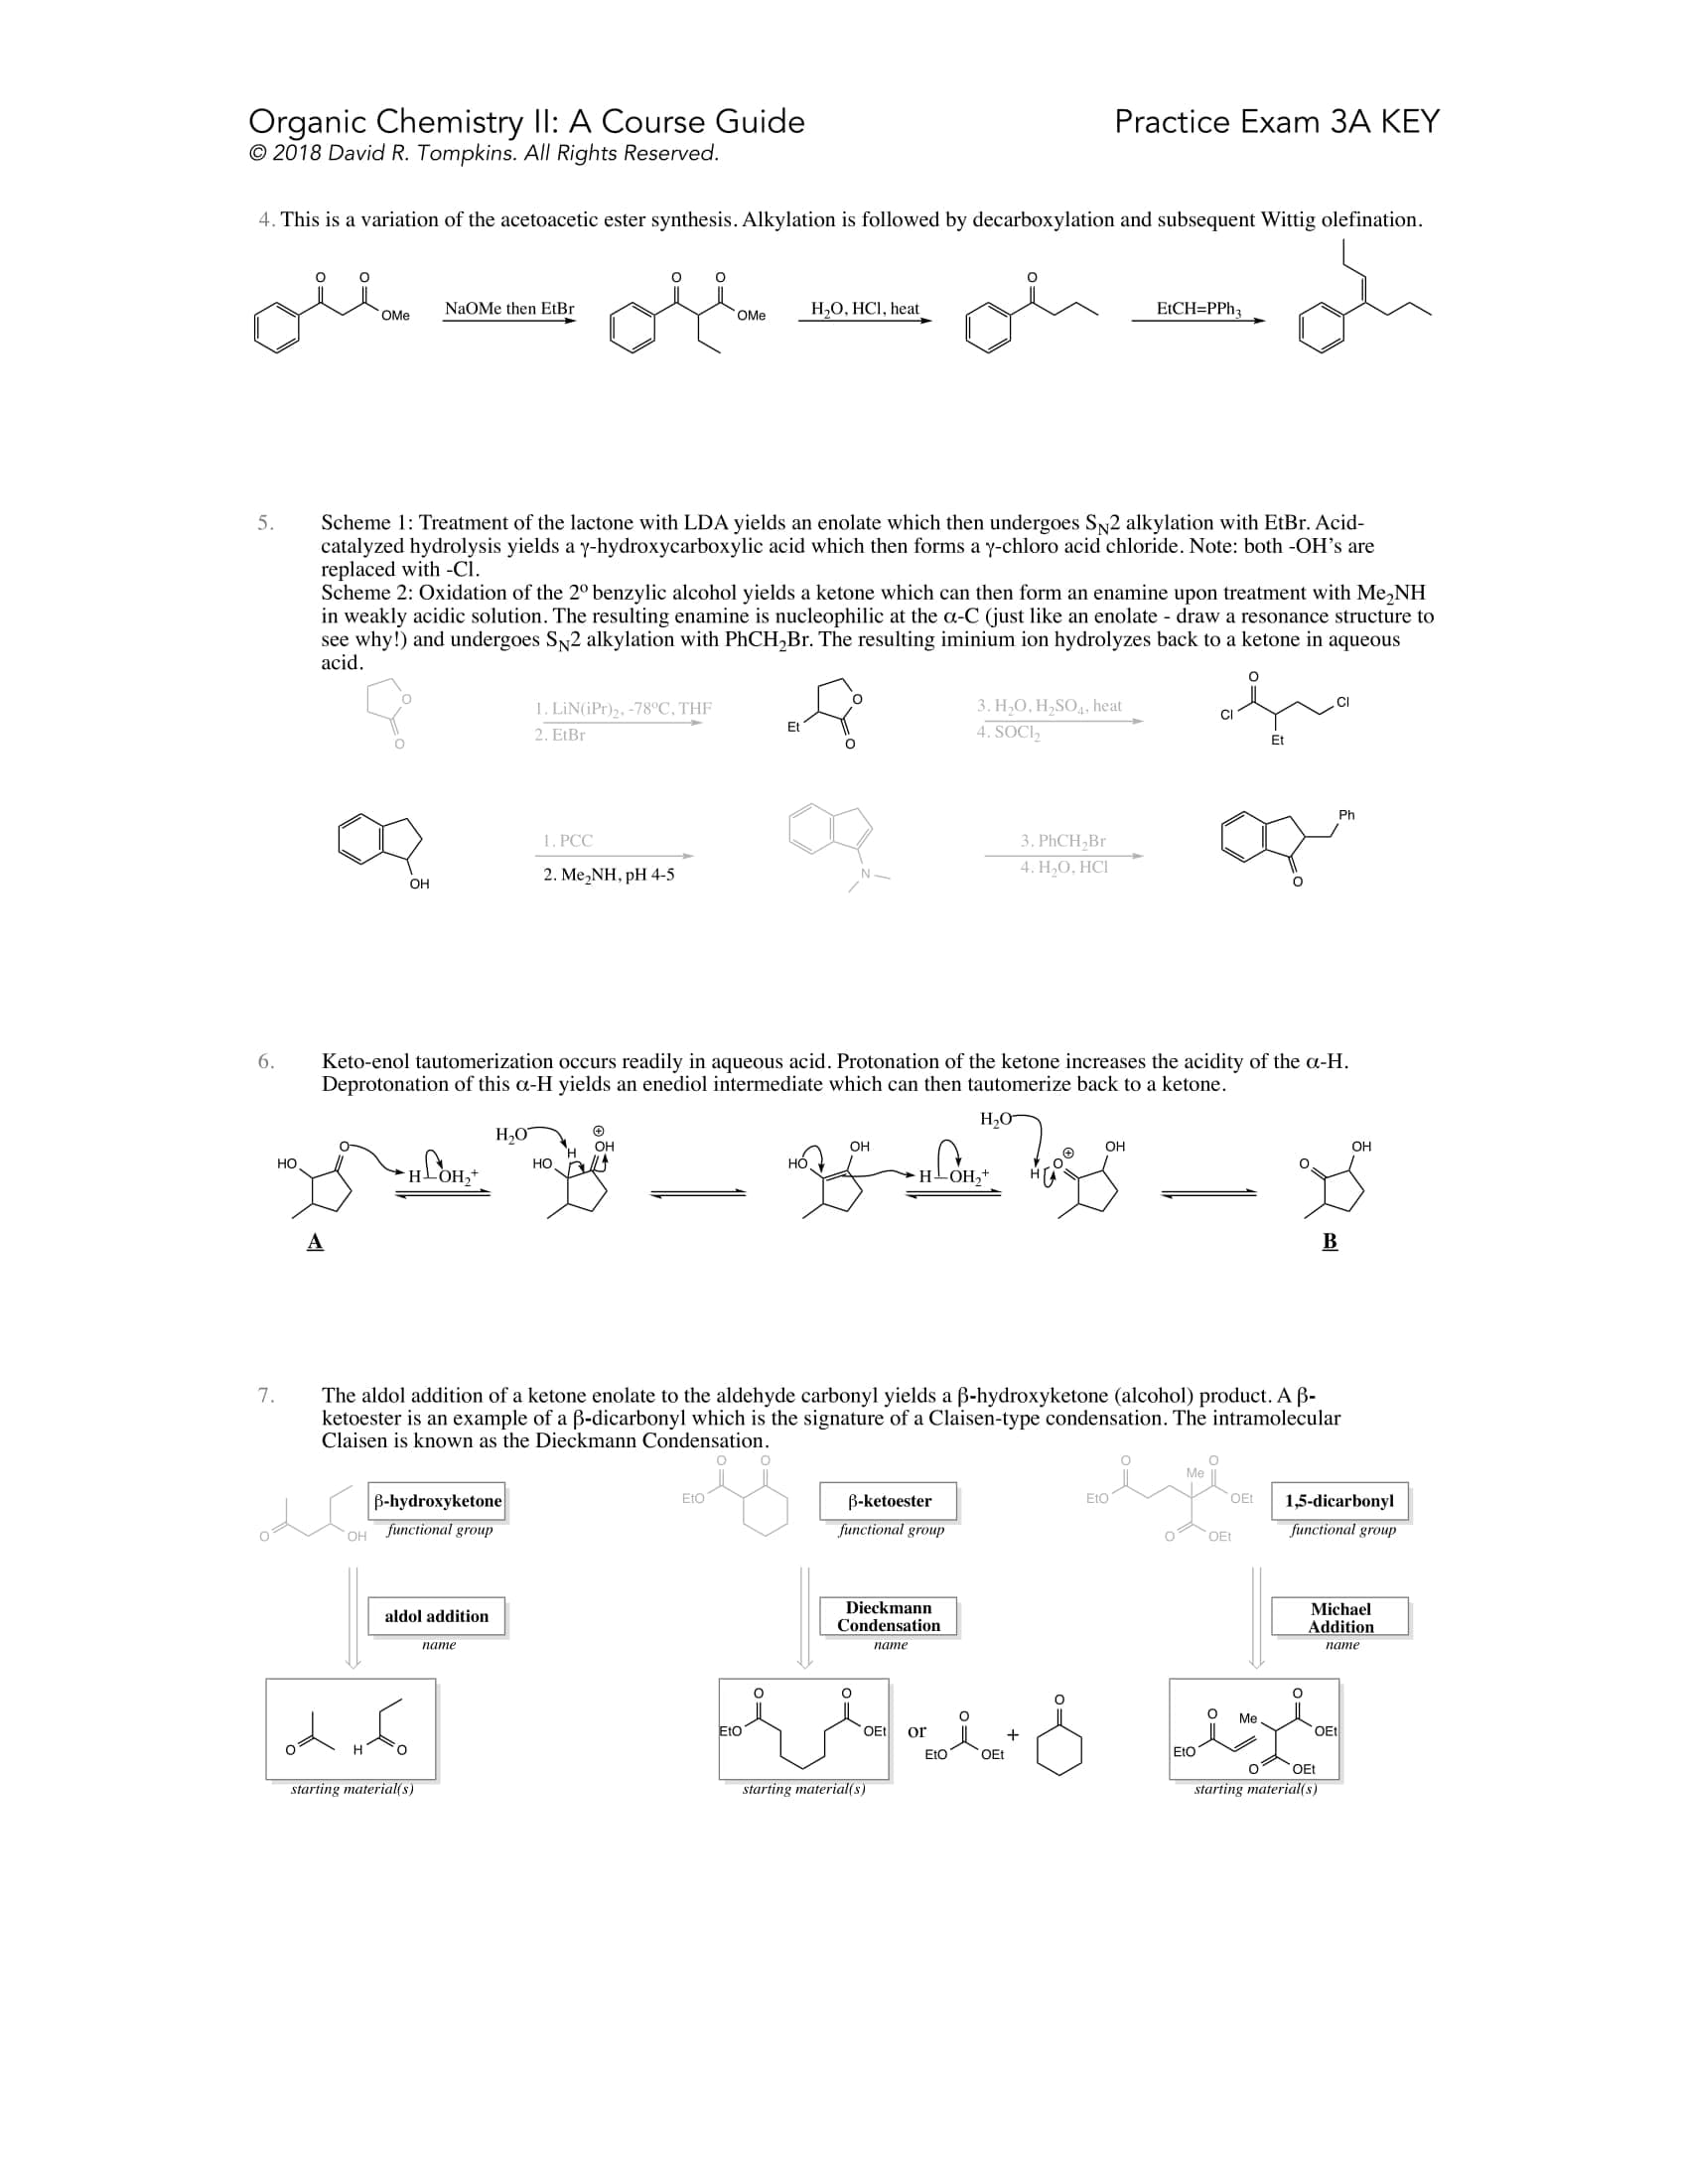 Introduction to Organic Chemistry II Course Guide Example Page 4